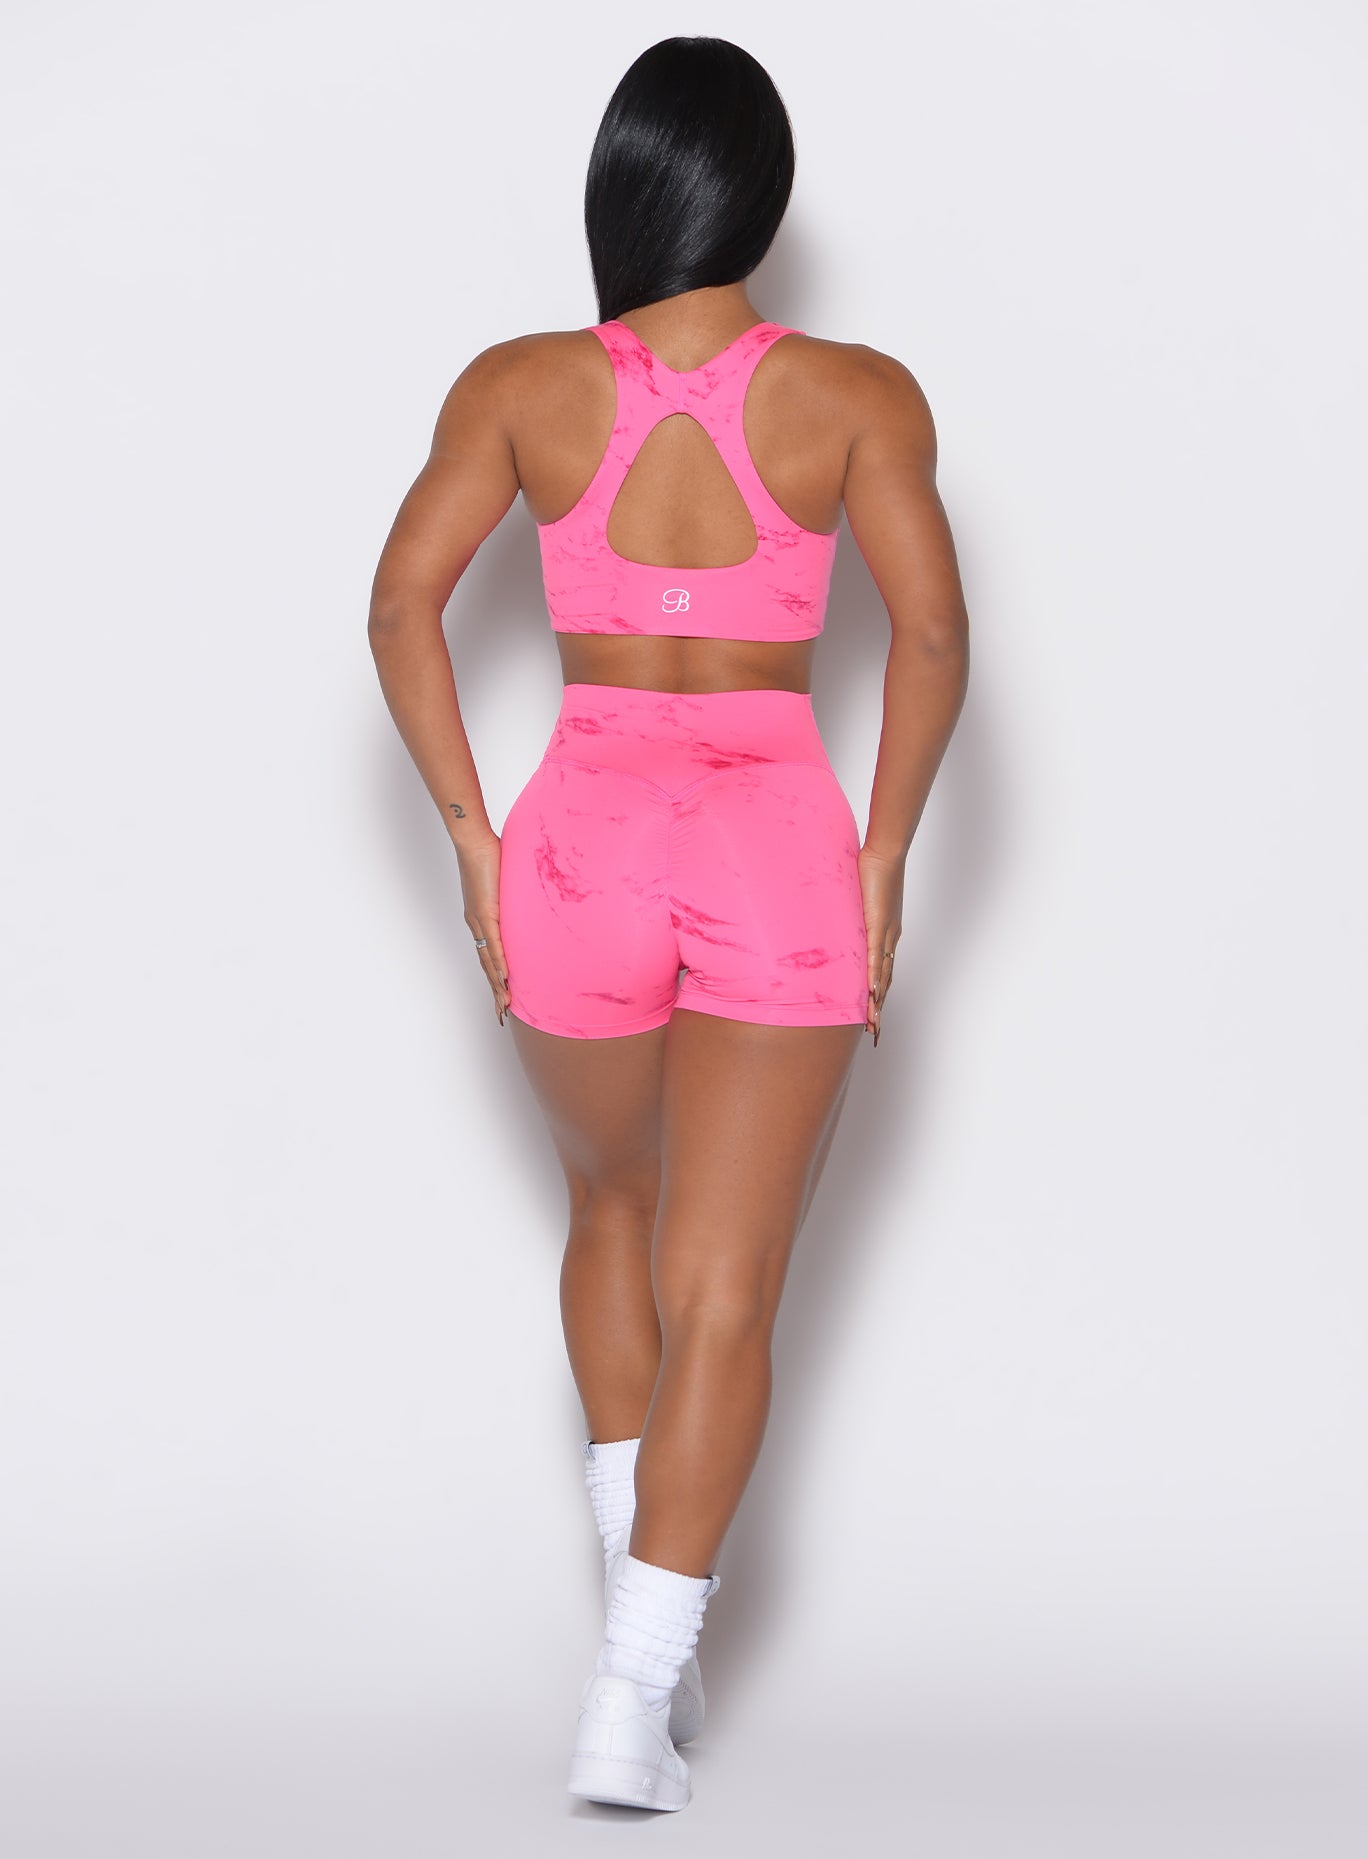 back profile view of a model wearing our fit marble shorts in Cotton Candy Skies color along with a matching sports bra